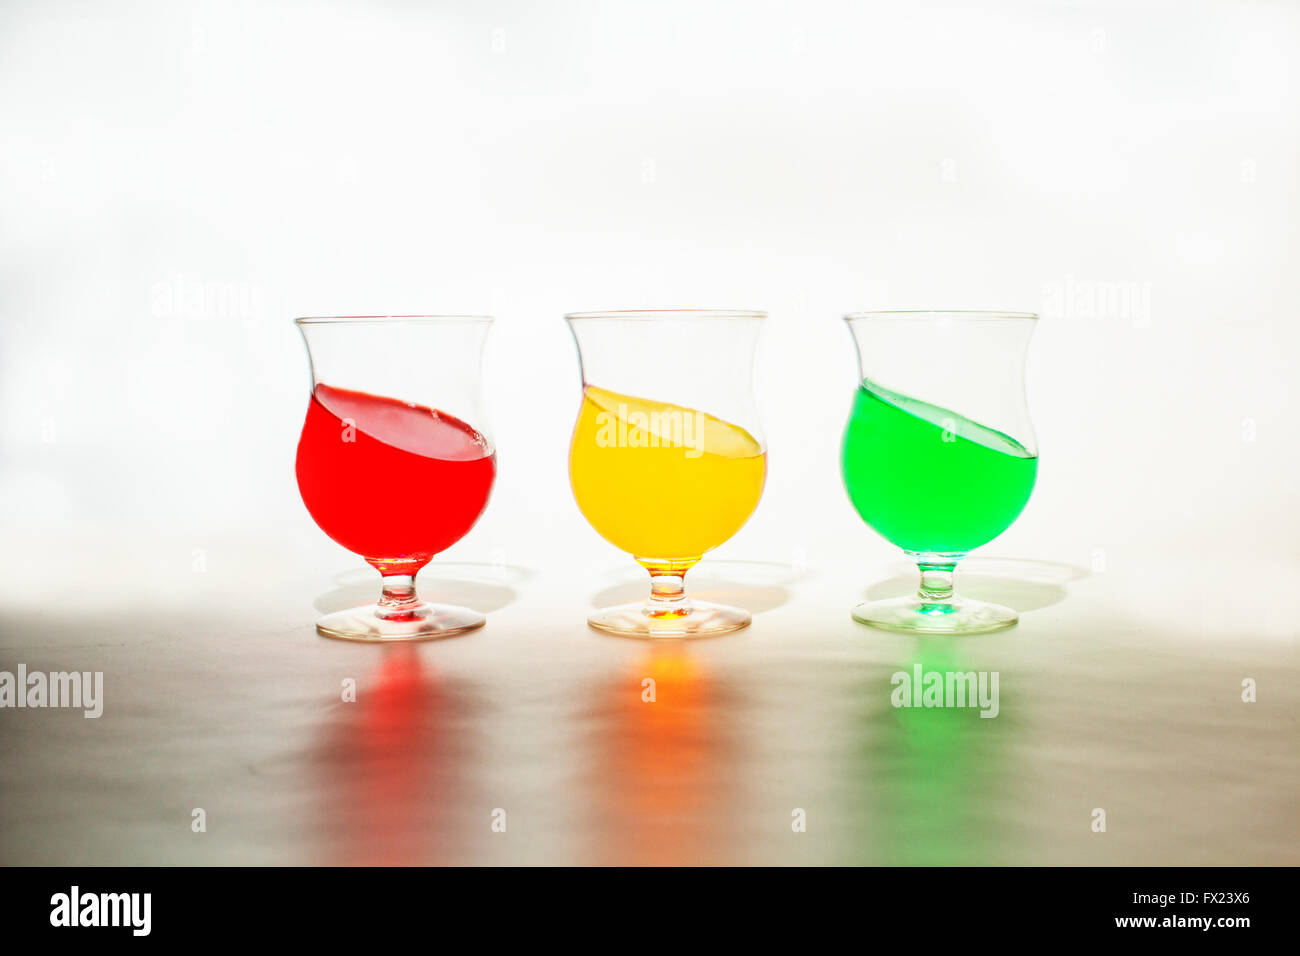 RED, YELLOW & GREEN  GELATIN IN GLASSES.  GELATIN IS SLANTED TO GIVE A FUN ASPECT TO THE IMAGE. Stock Photo